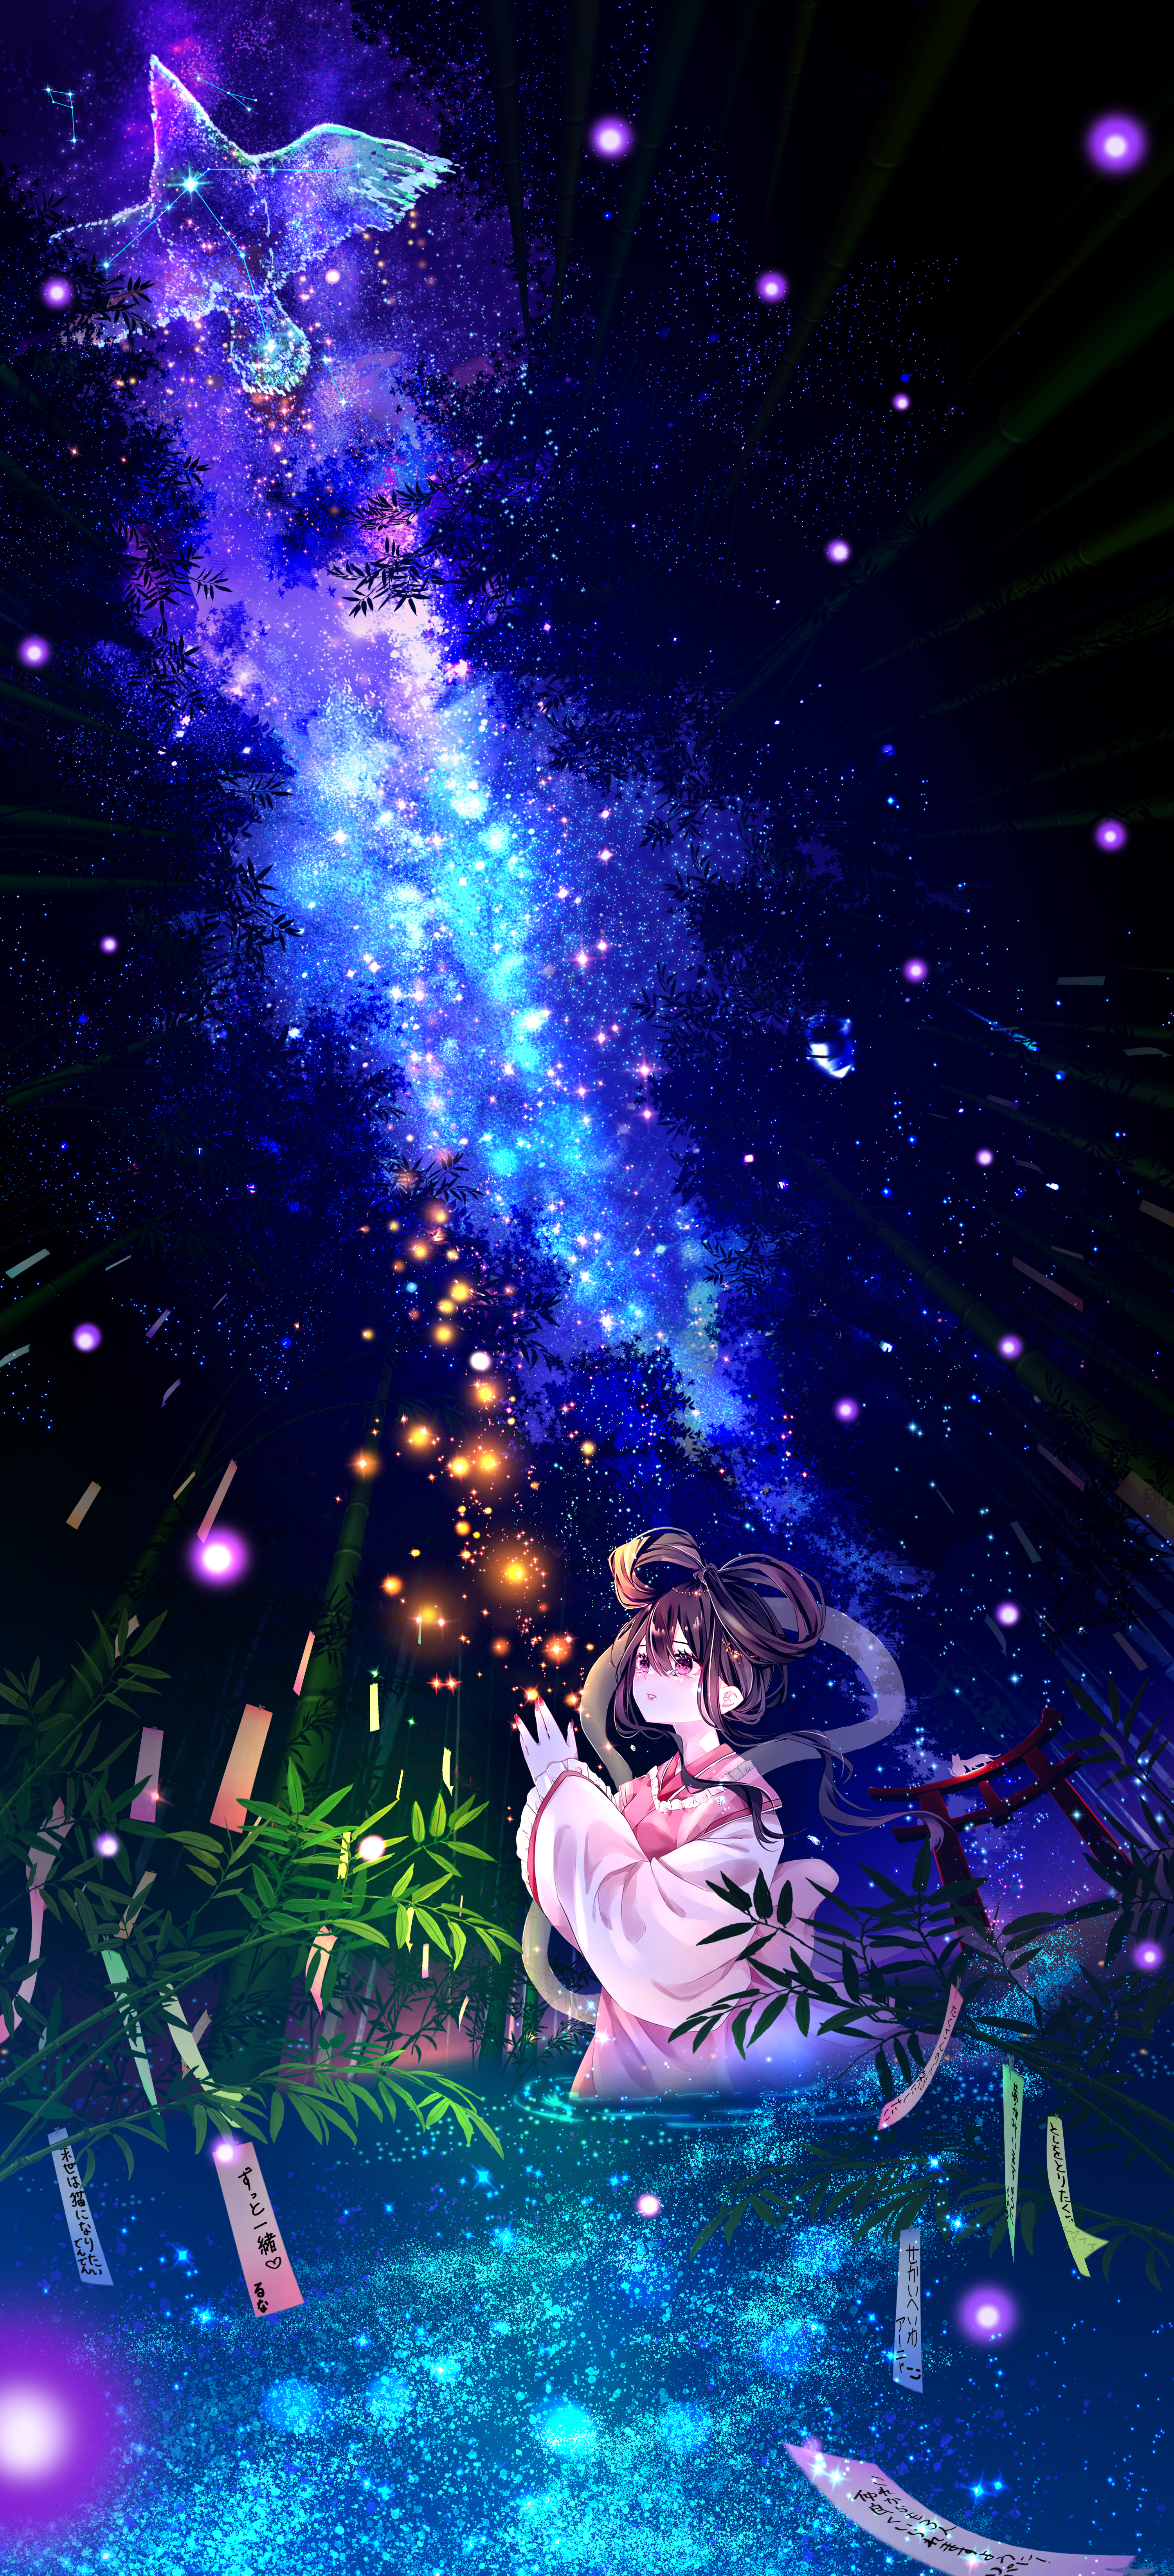 Anime 3000x6583 long hair dark hair nebula standing in water water forest asian clothing bamboo Milky Way starry night stars pink eyes tears constellations women outdoors sky lights leaves sparkles looking up low-angle torii birds portrait display makoron117 anime girls reflection lake